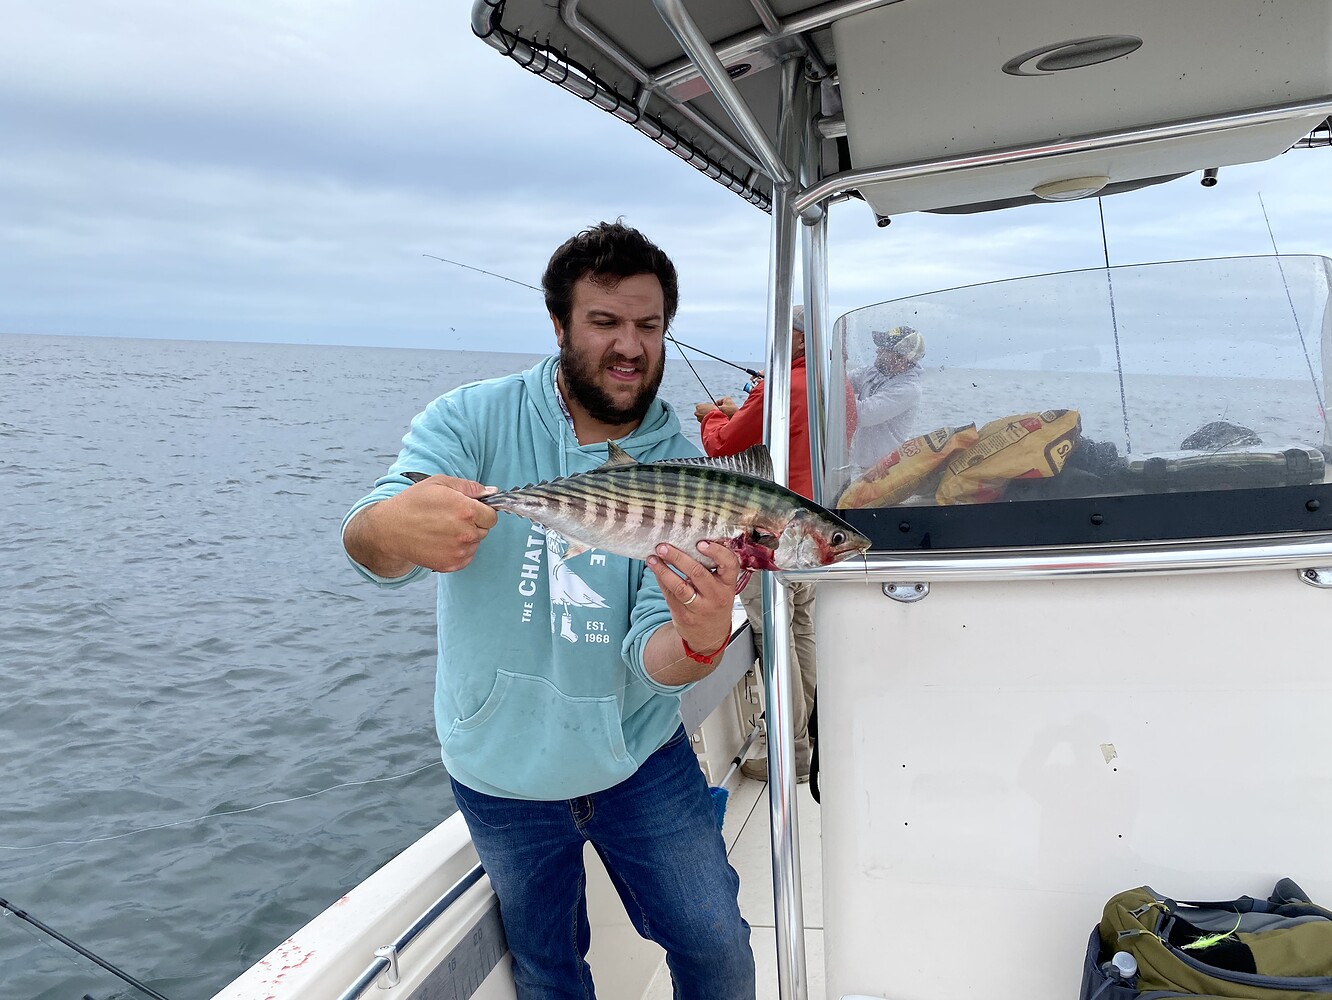 Friday September 3rd Cape Cod Fishing Report - My Fishing Cape Cod